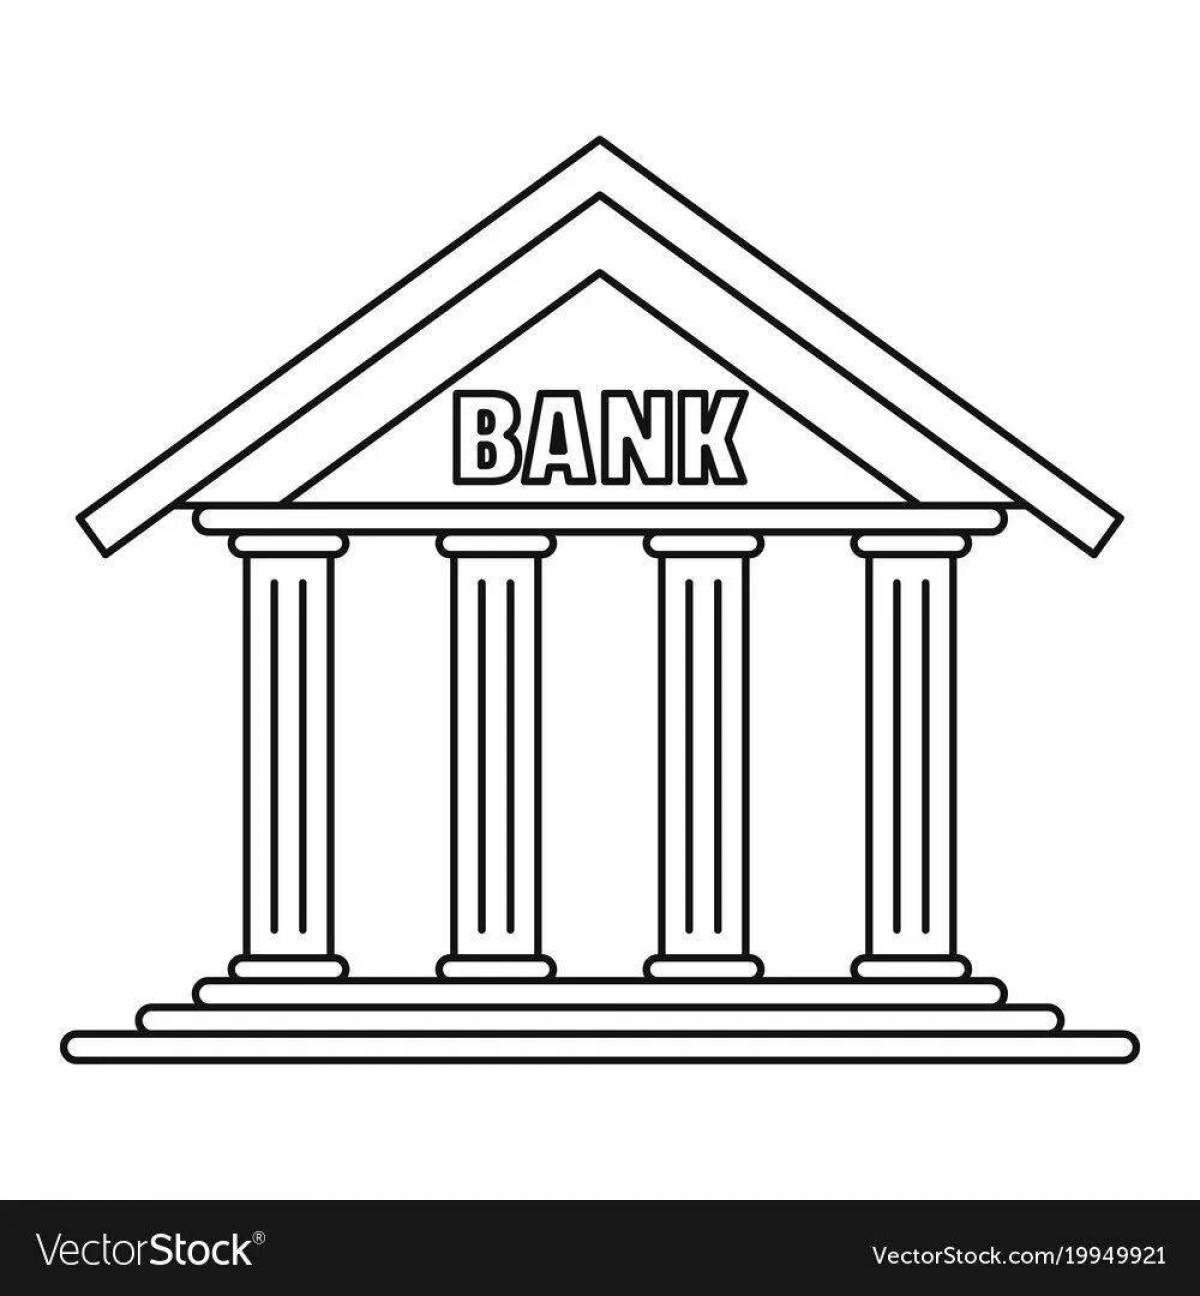 Animated bank coloring page